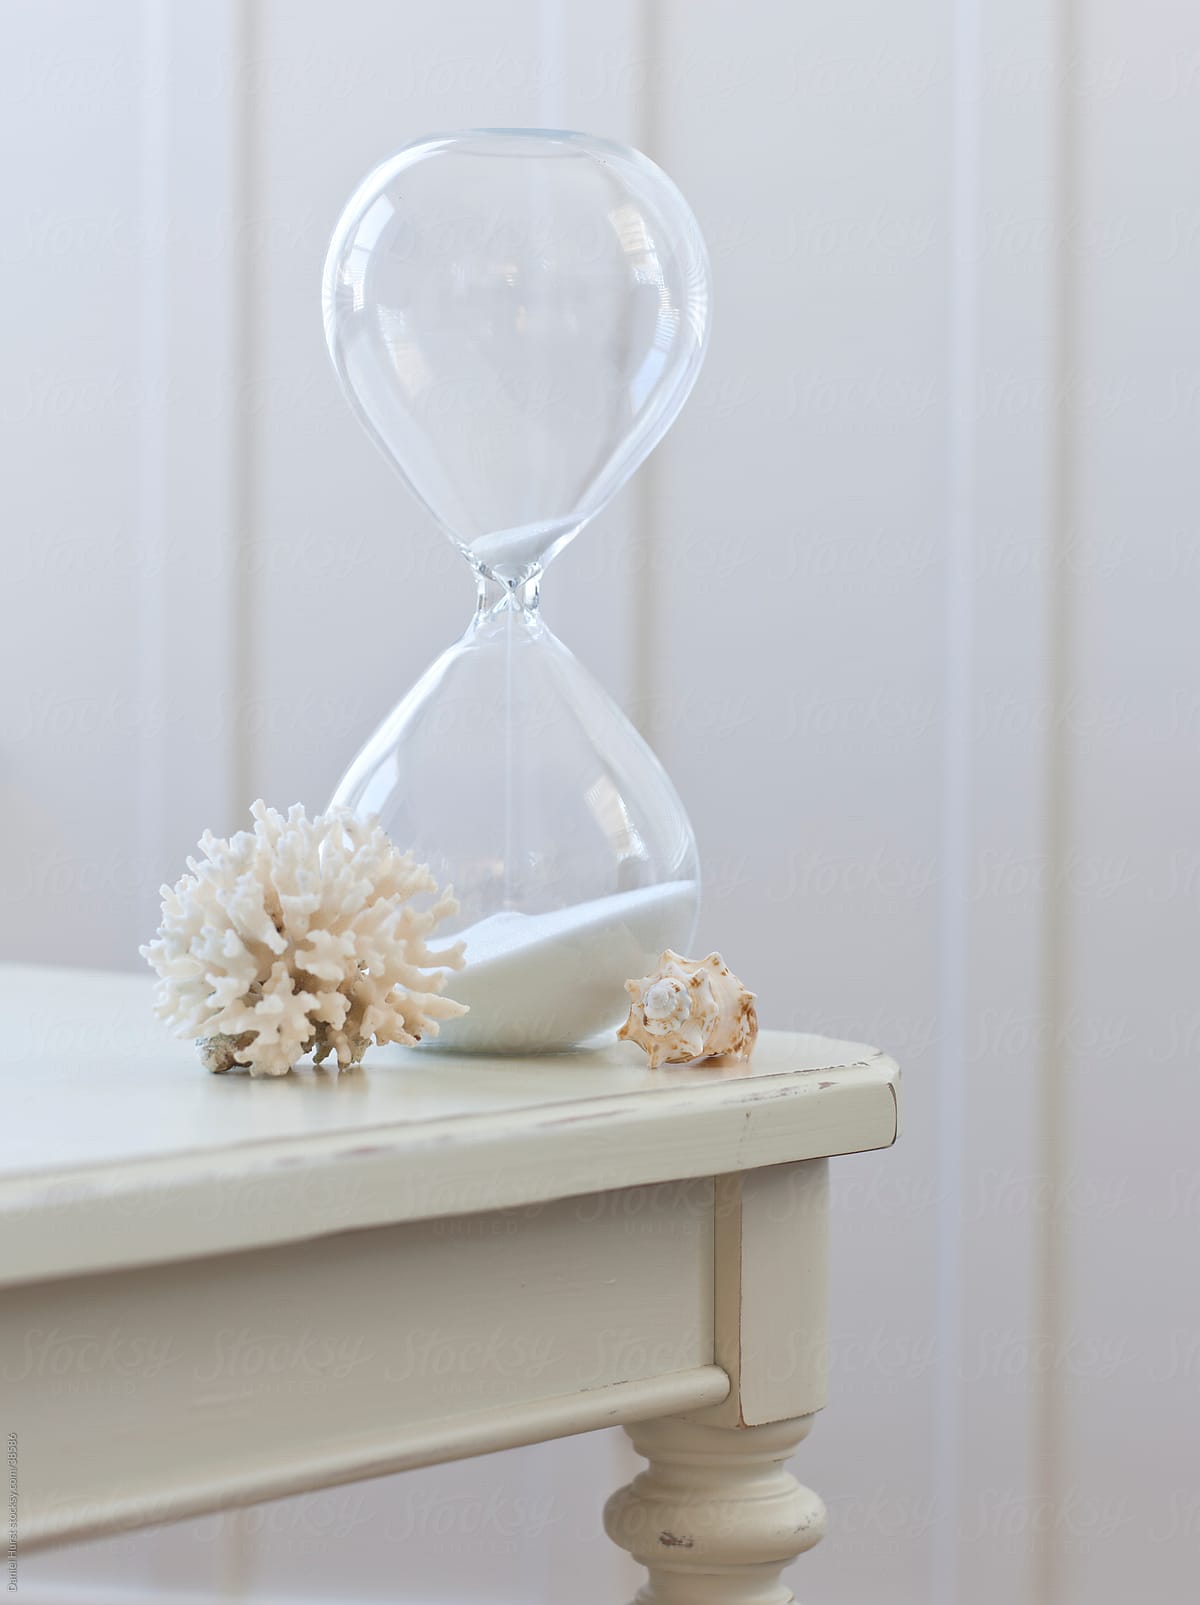 Hourglass, coral and shell on table